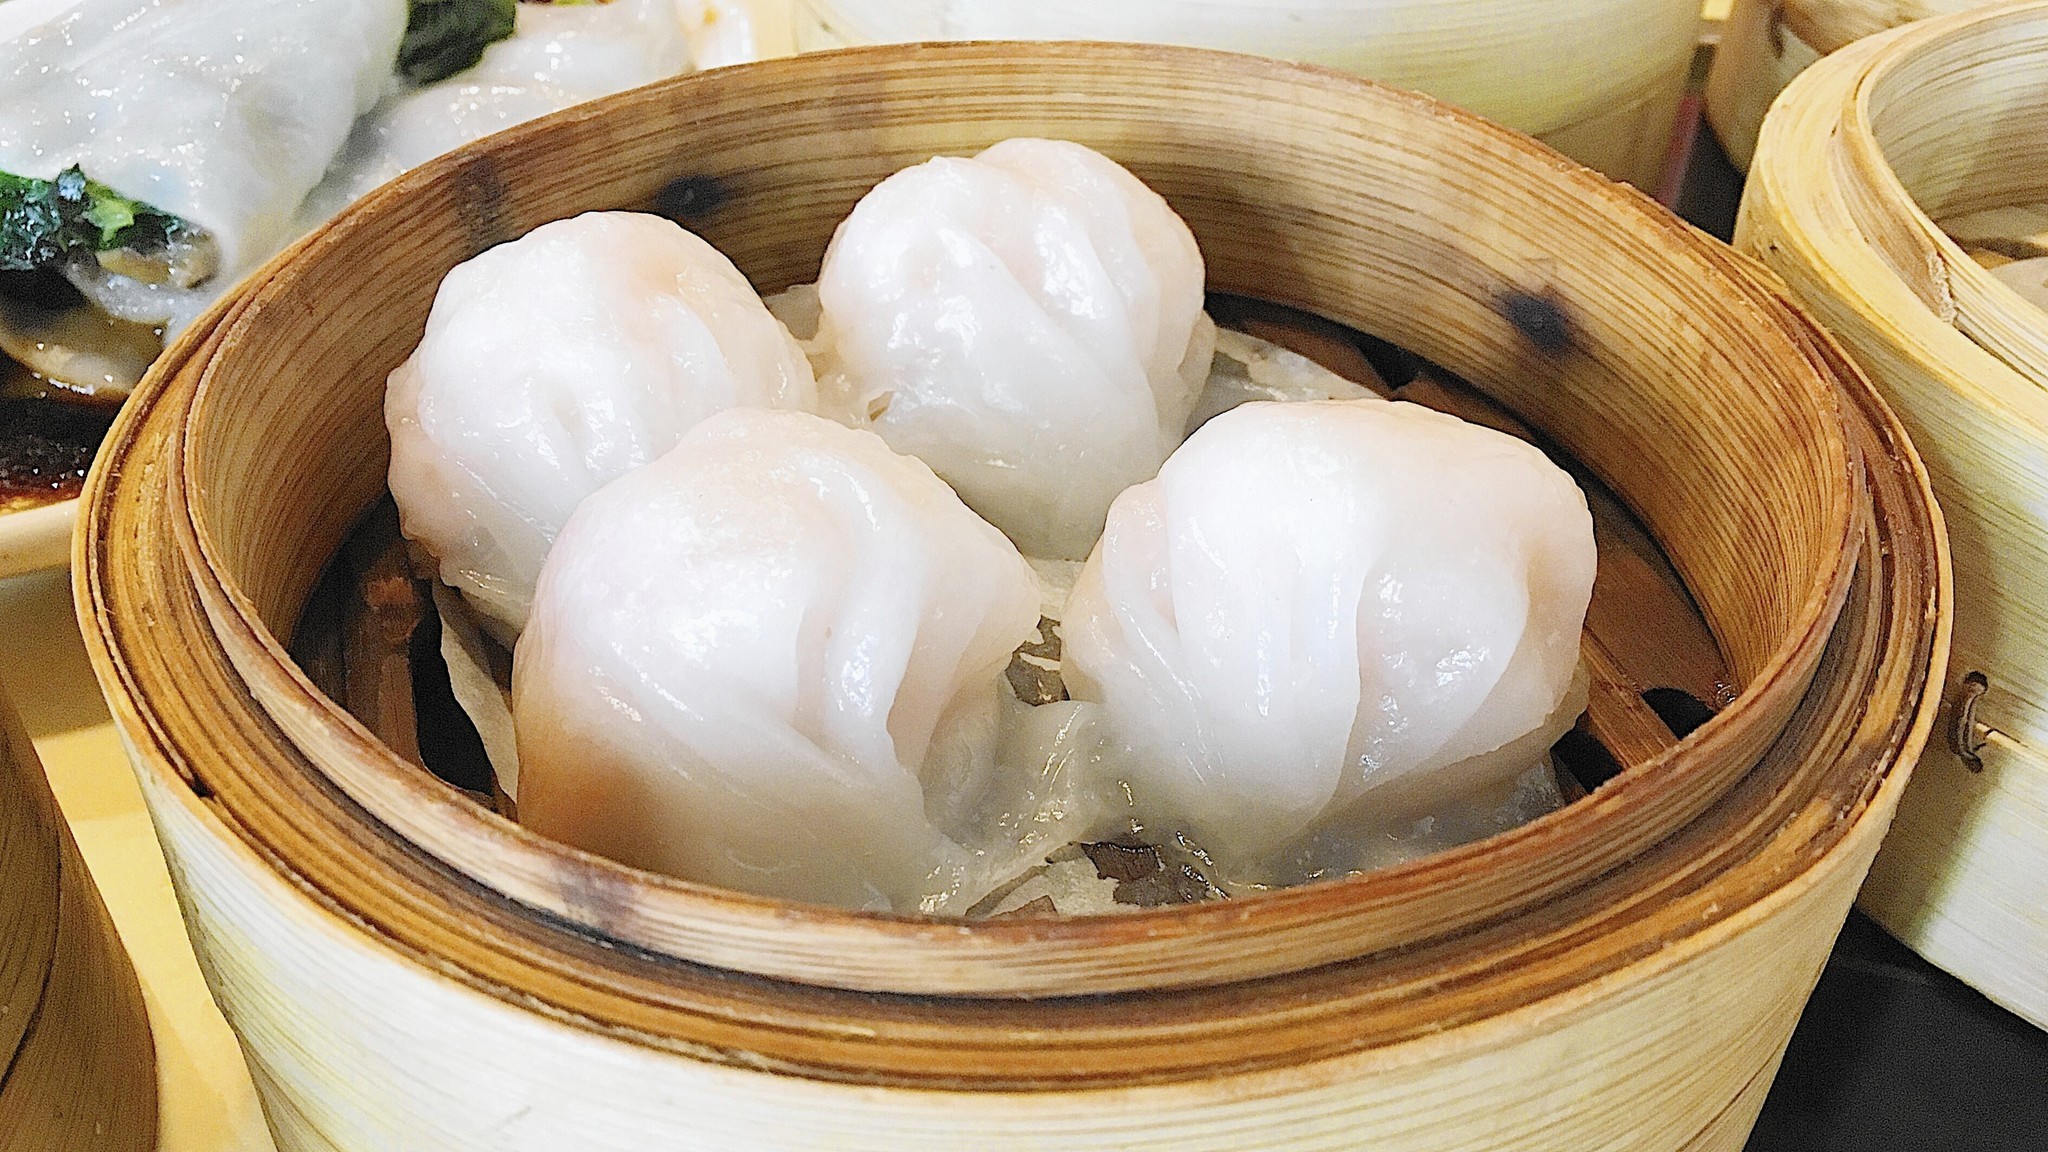 Dim sum guide: What to order, and what order to eat it 